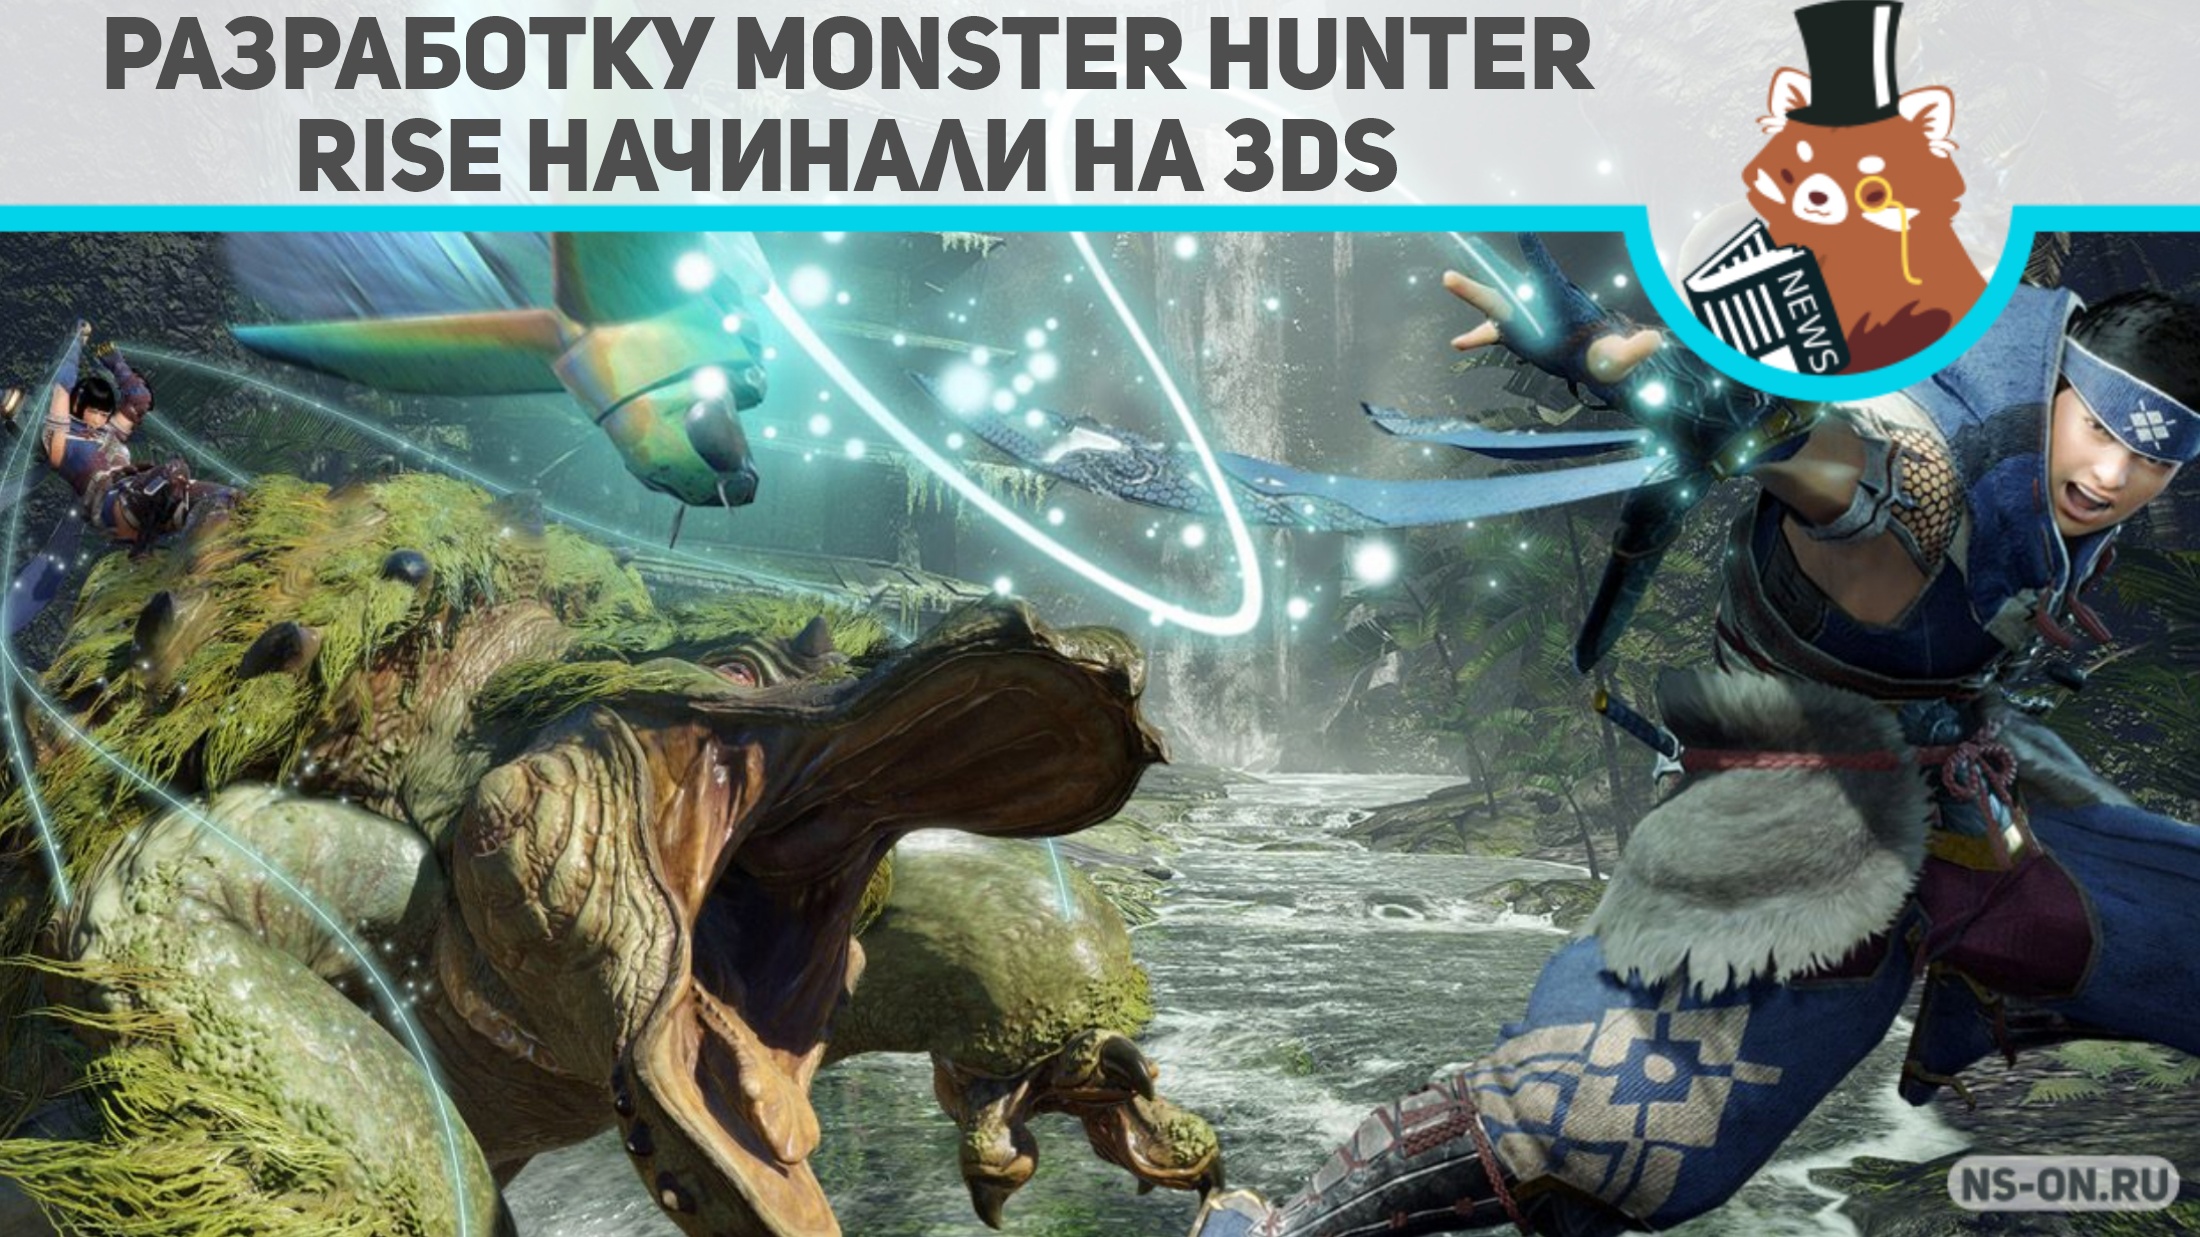 You are currently viewing Разработку Monster Hunter Rise начинали на 3DS